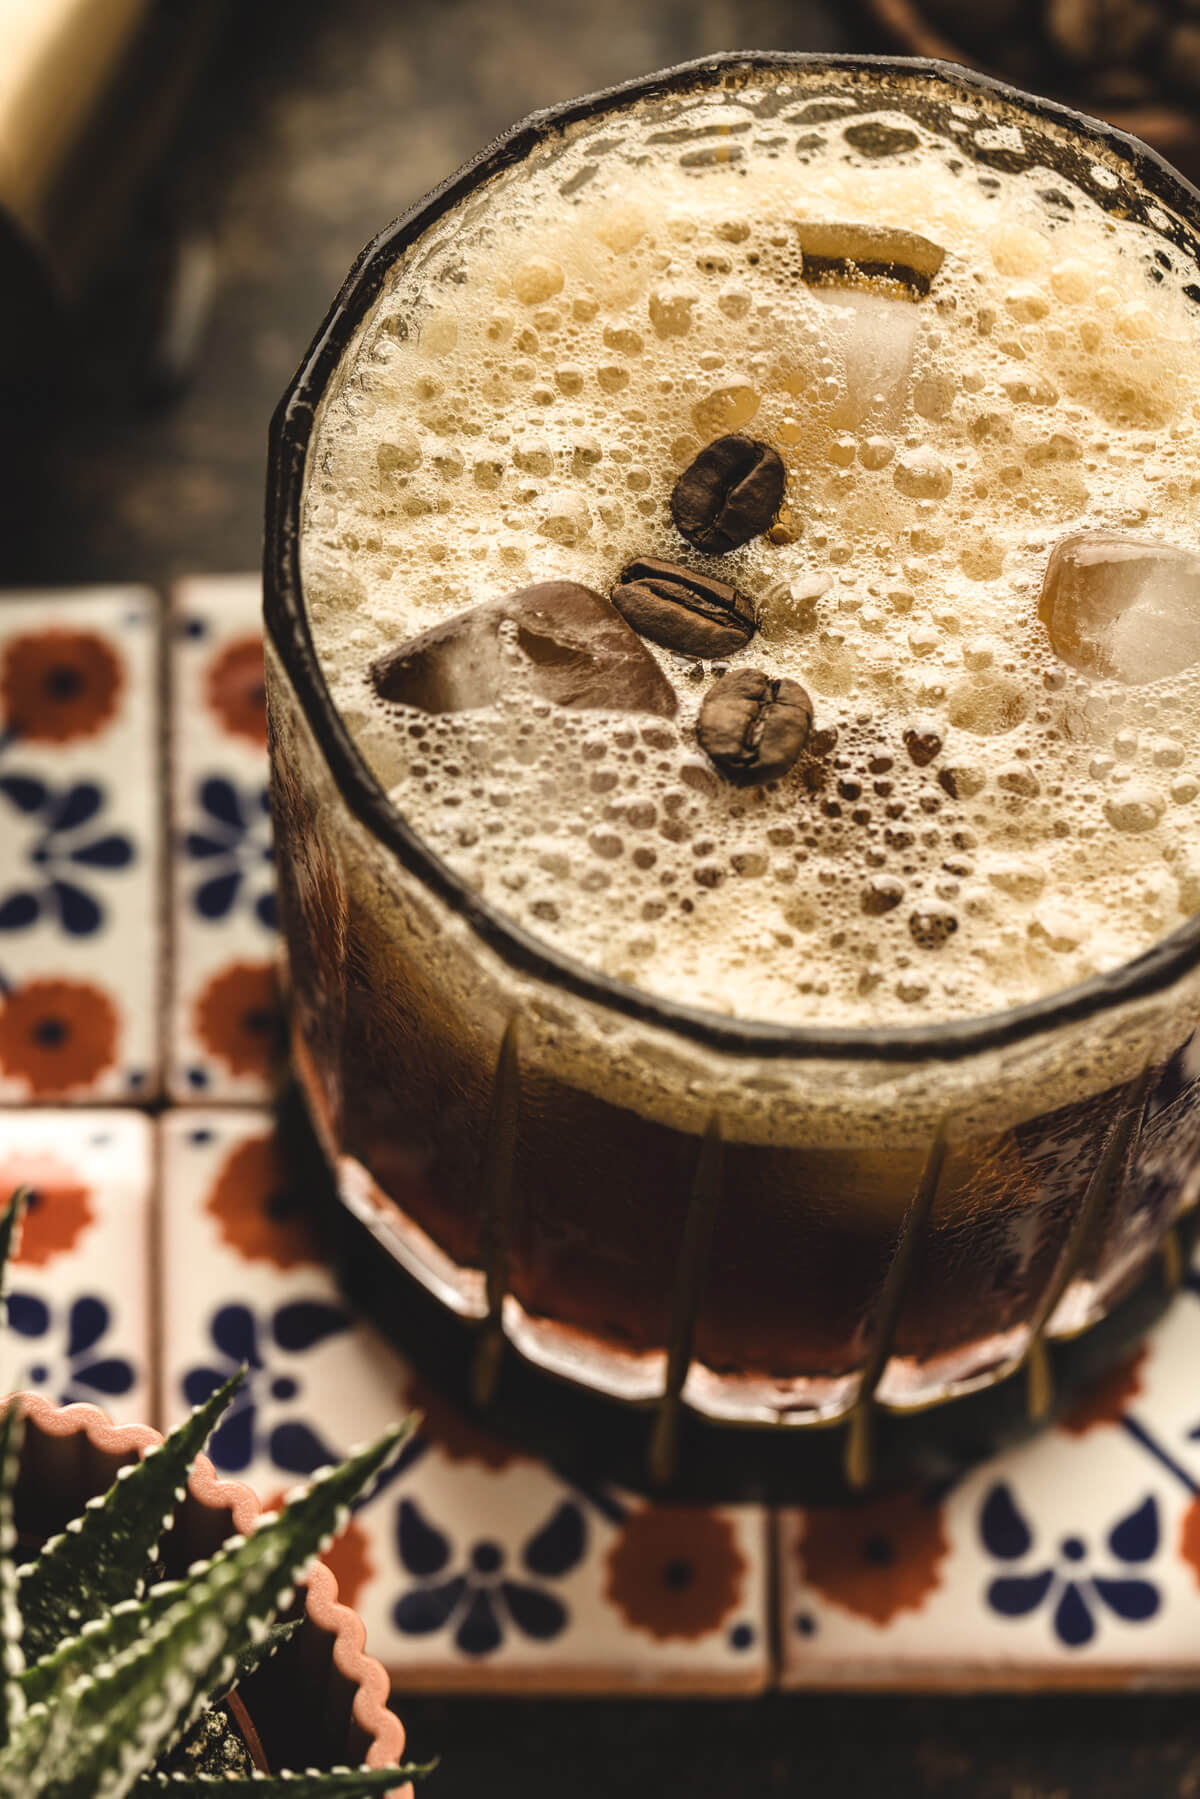 A foam topped nutty brown cocktail garnished with coffee beans in a rocks glass on Mexican patterned tiles. 